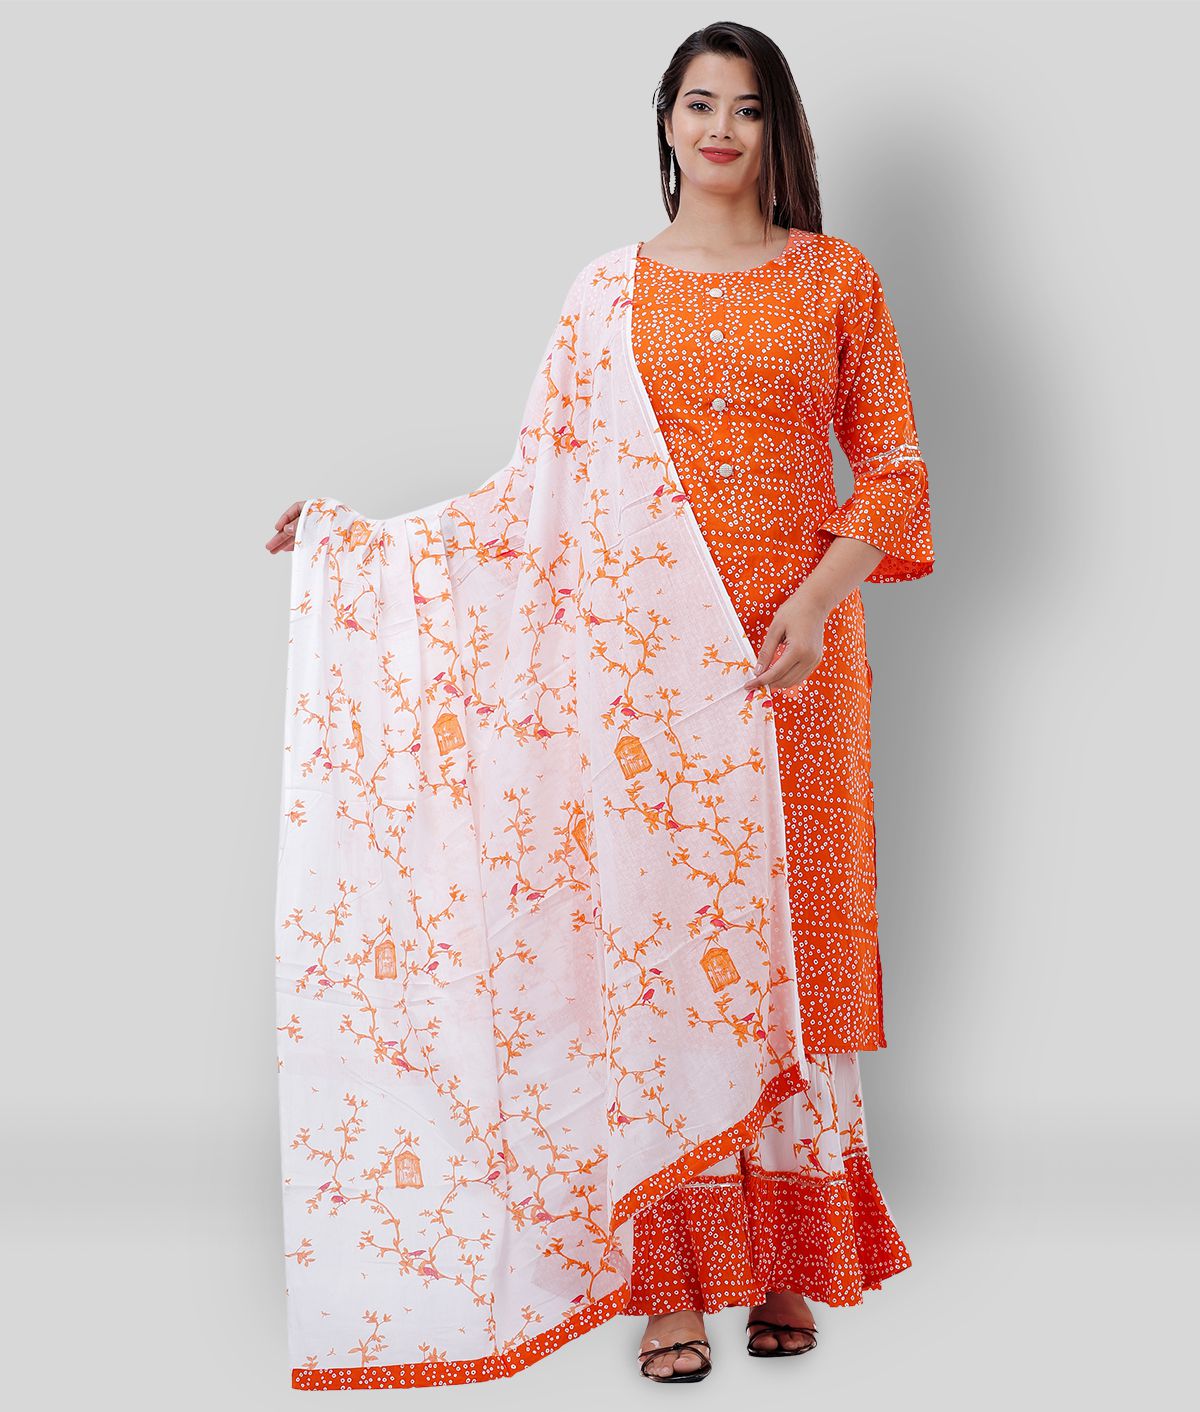     			Lee Moda - Orange Straight Rayon Women's Stitched Salwar Suit ( Pack of 1 )